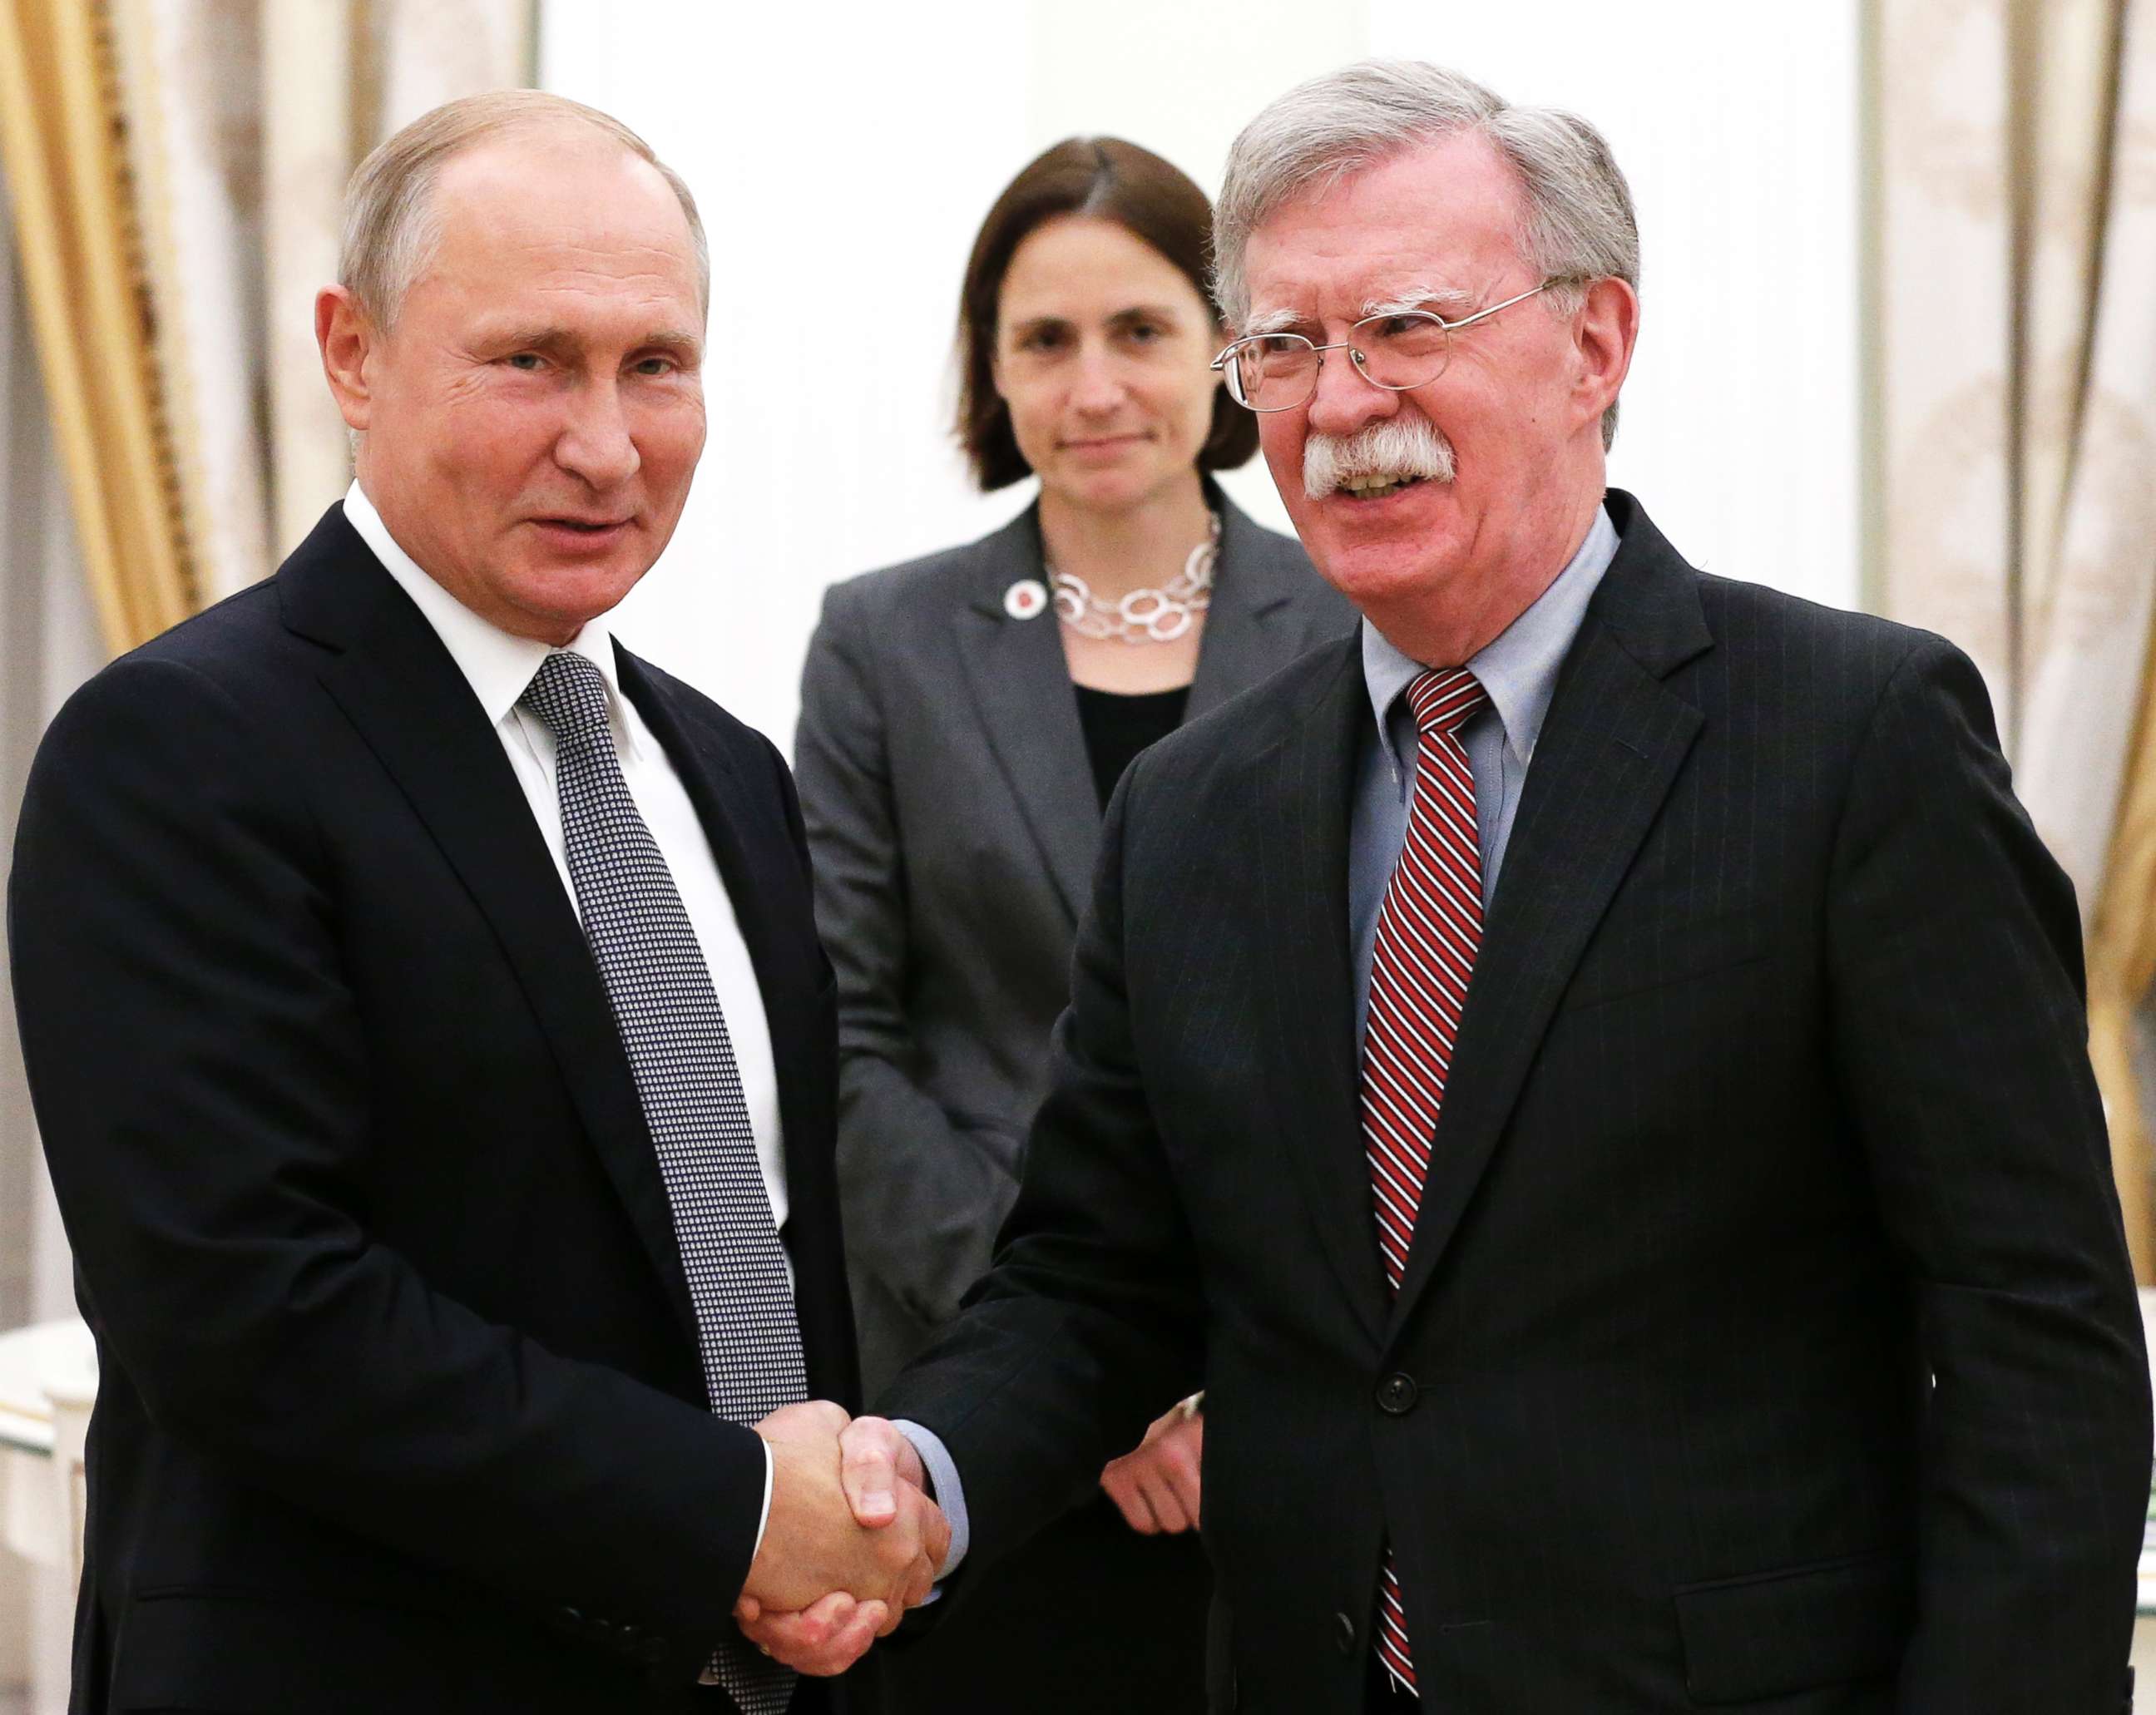 PHOTO: Russian President Vladimir Putin, left, and U.S. National security adviser John Bolton shake hands during their meeting in the Kremlin in Moscow, Oct. 23, 2018.